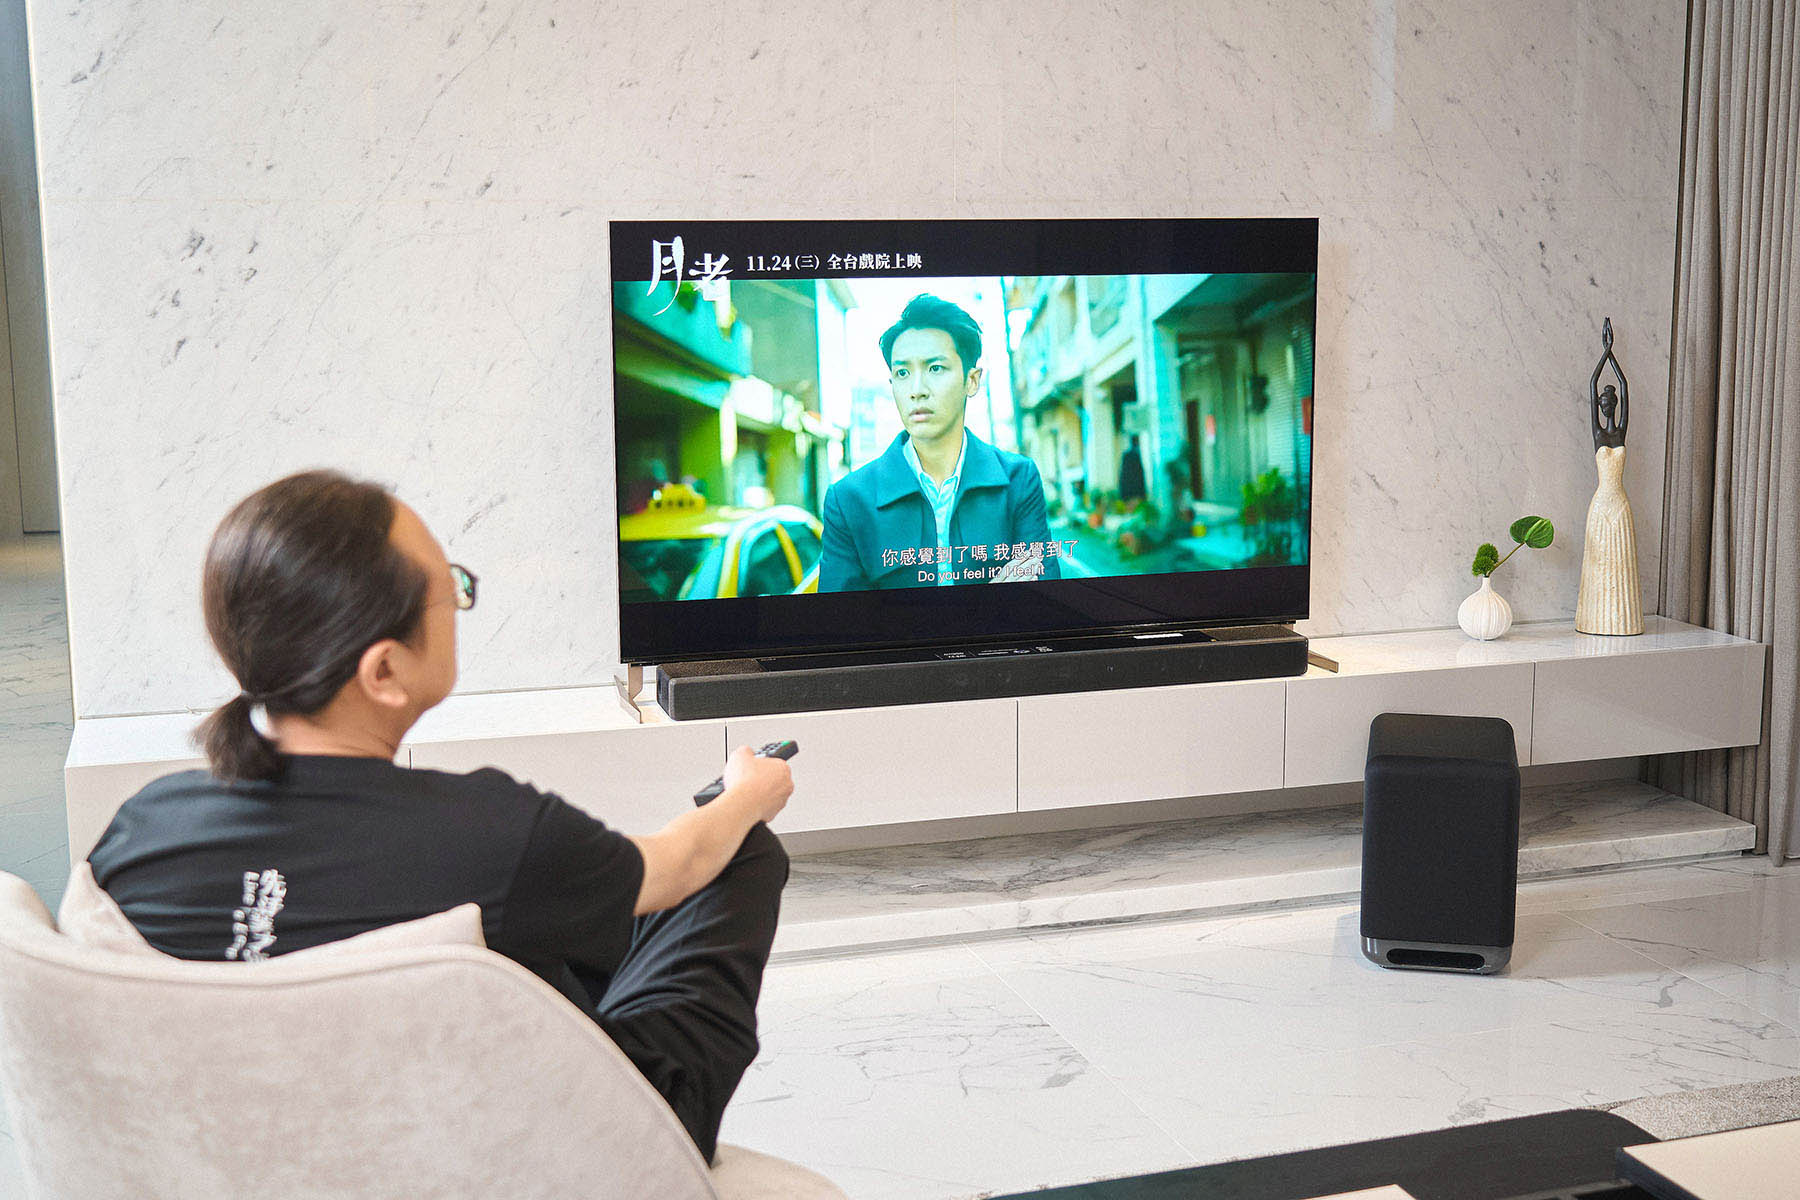 Interview with Zhu Shiyi, winner of the Golden Horse Award for Best Sound Effects, to explore how the Sony HT-A7000 Soundbar creates a more immersive entertainment experience